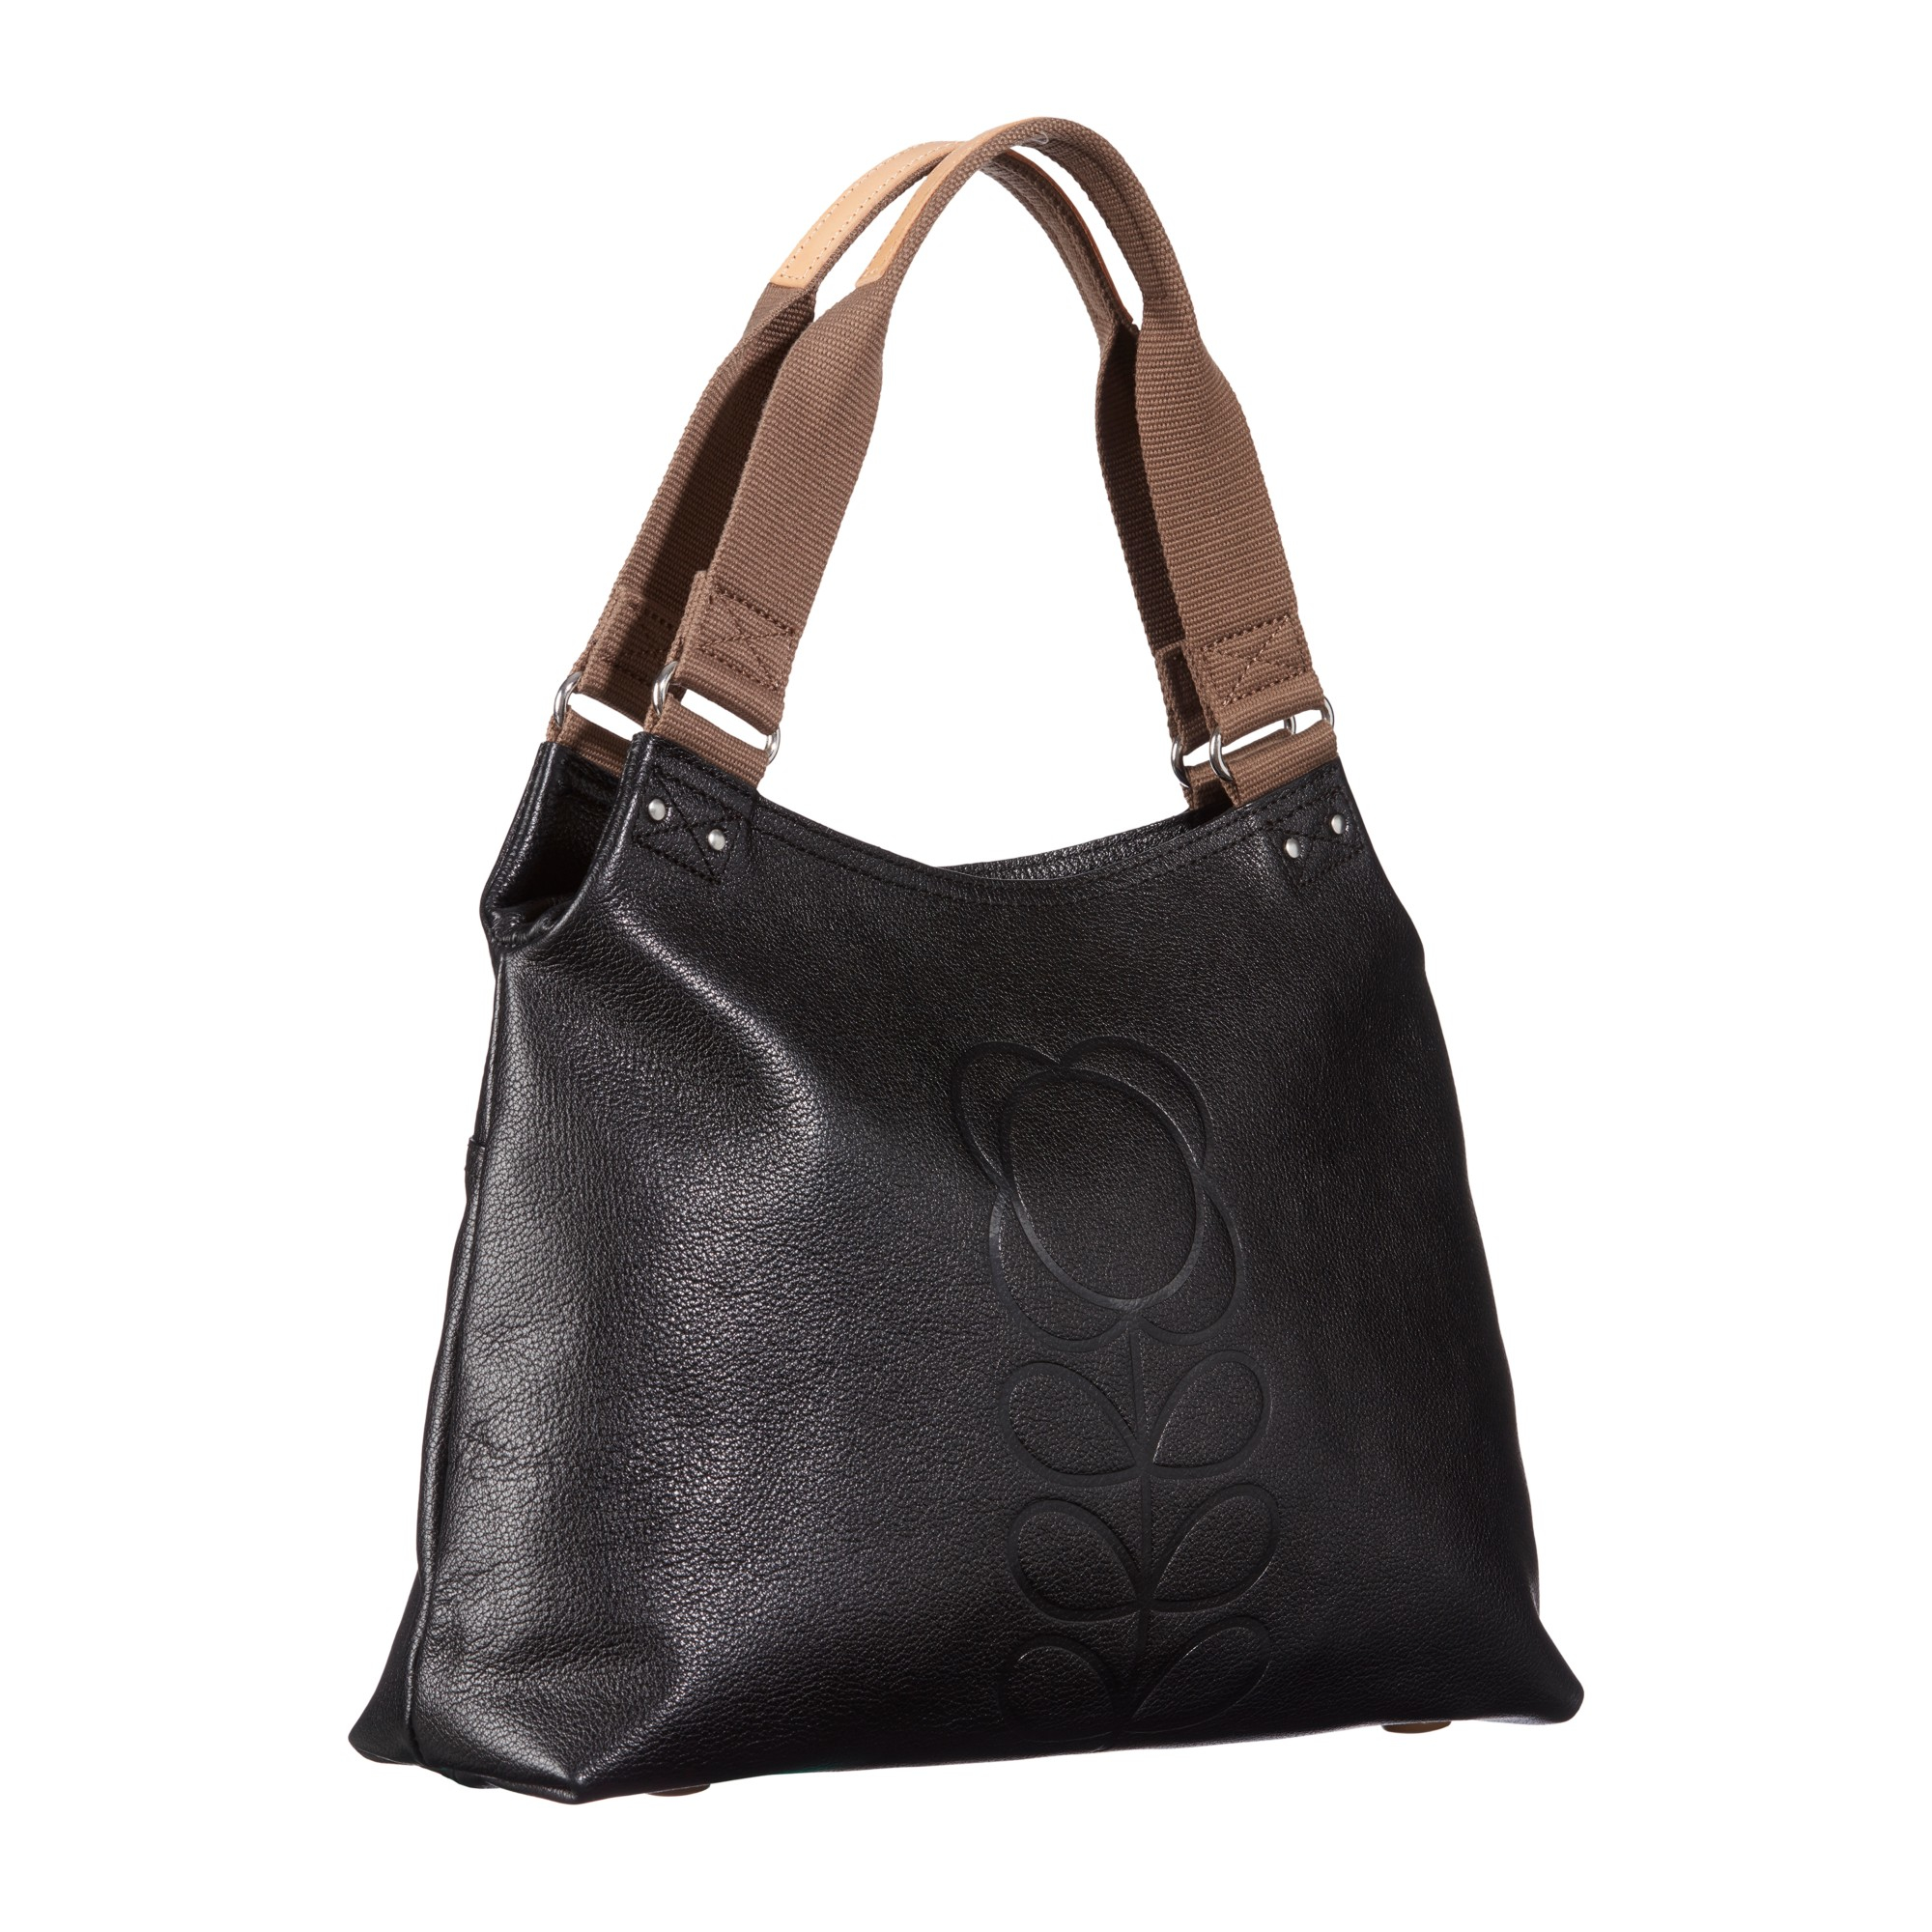 Orla Kiely Textured Leather Zipped Shoulder Bag in Black ...